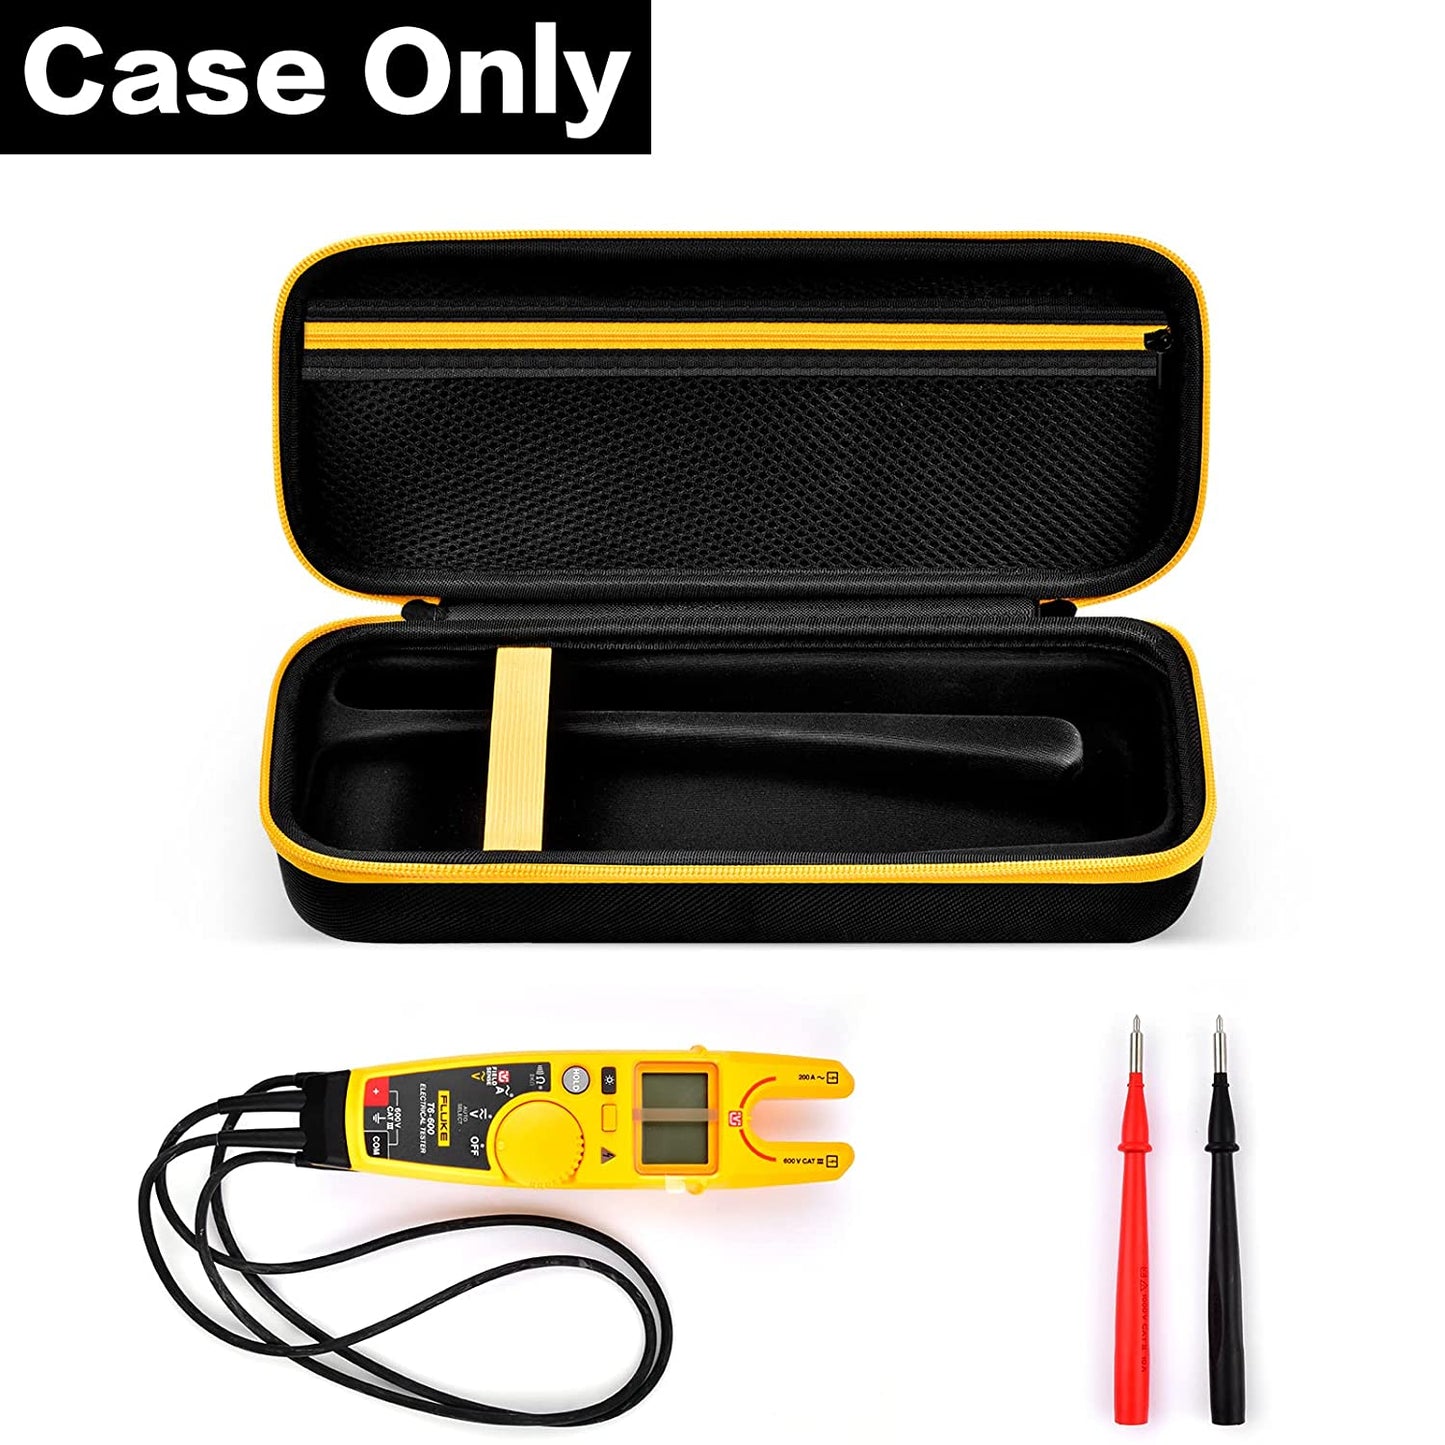 Case Compatible with Fluke T5-1000/ T5 600/ T6-1000/ T6 600 Electrical Voltage, Continuity and Current Tester Meter - Black (Box Only)